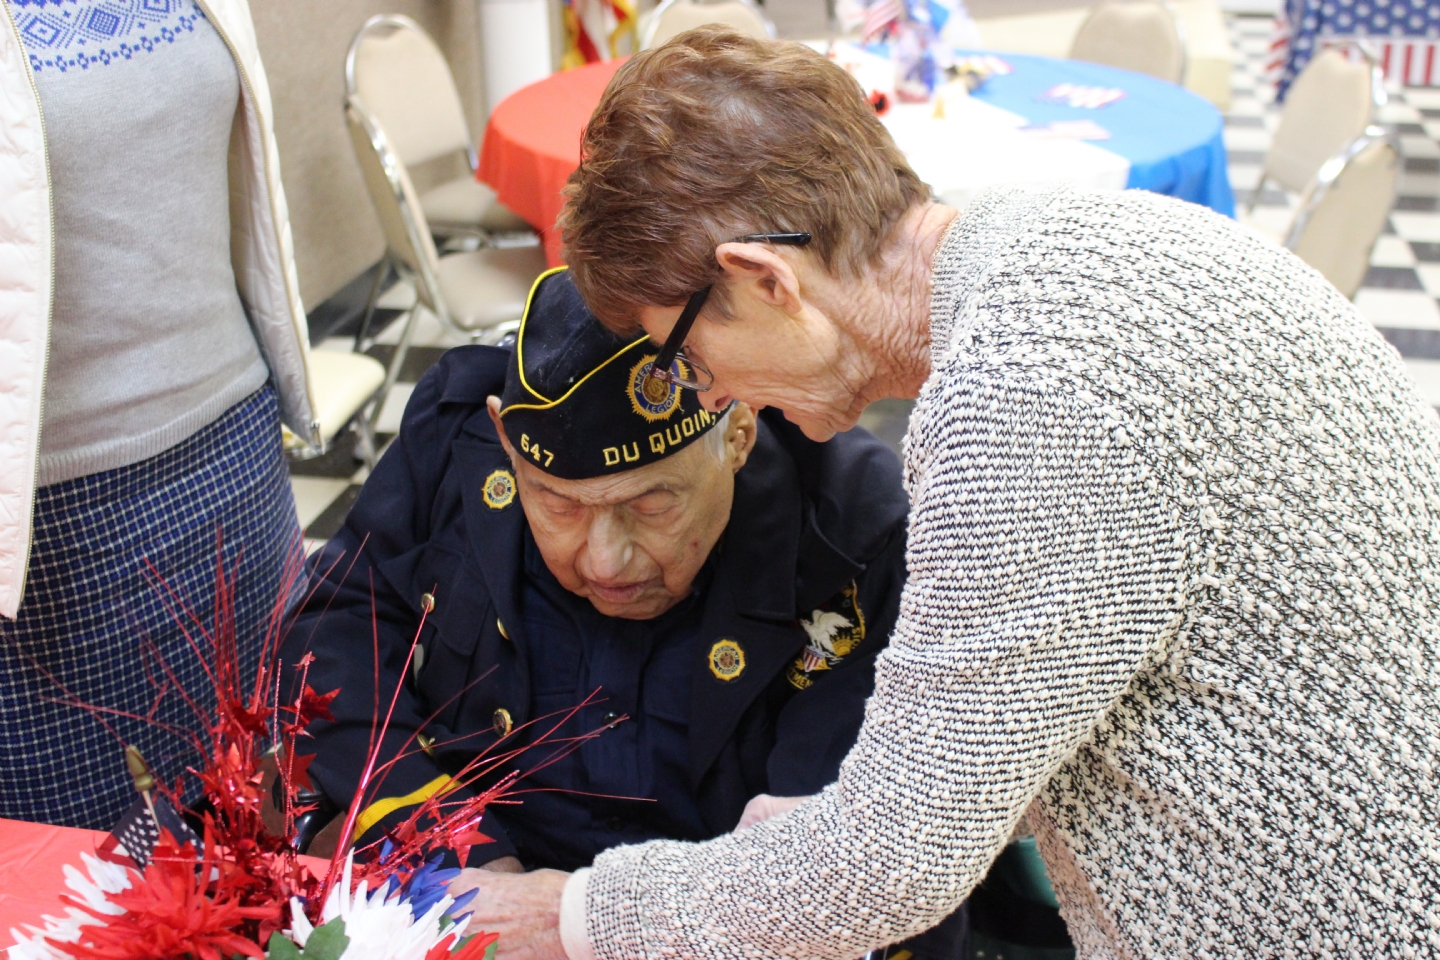 On Veteran's Day, November 11th 2018, the Benton American Legion Post 280 celebrated the American Legion Centennial. The highlight of this historic event was World War 2 Veteran, Carl Campanella, finally receiving the medals awarded him 73 years before.